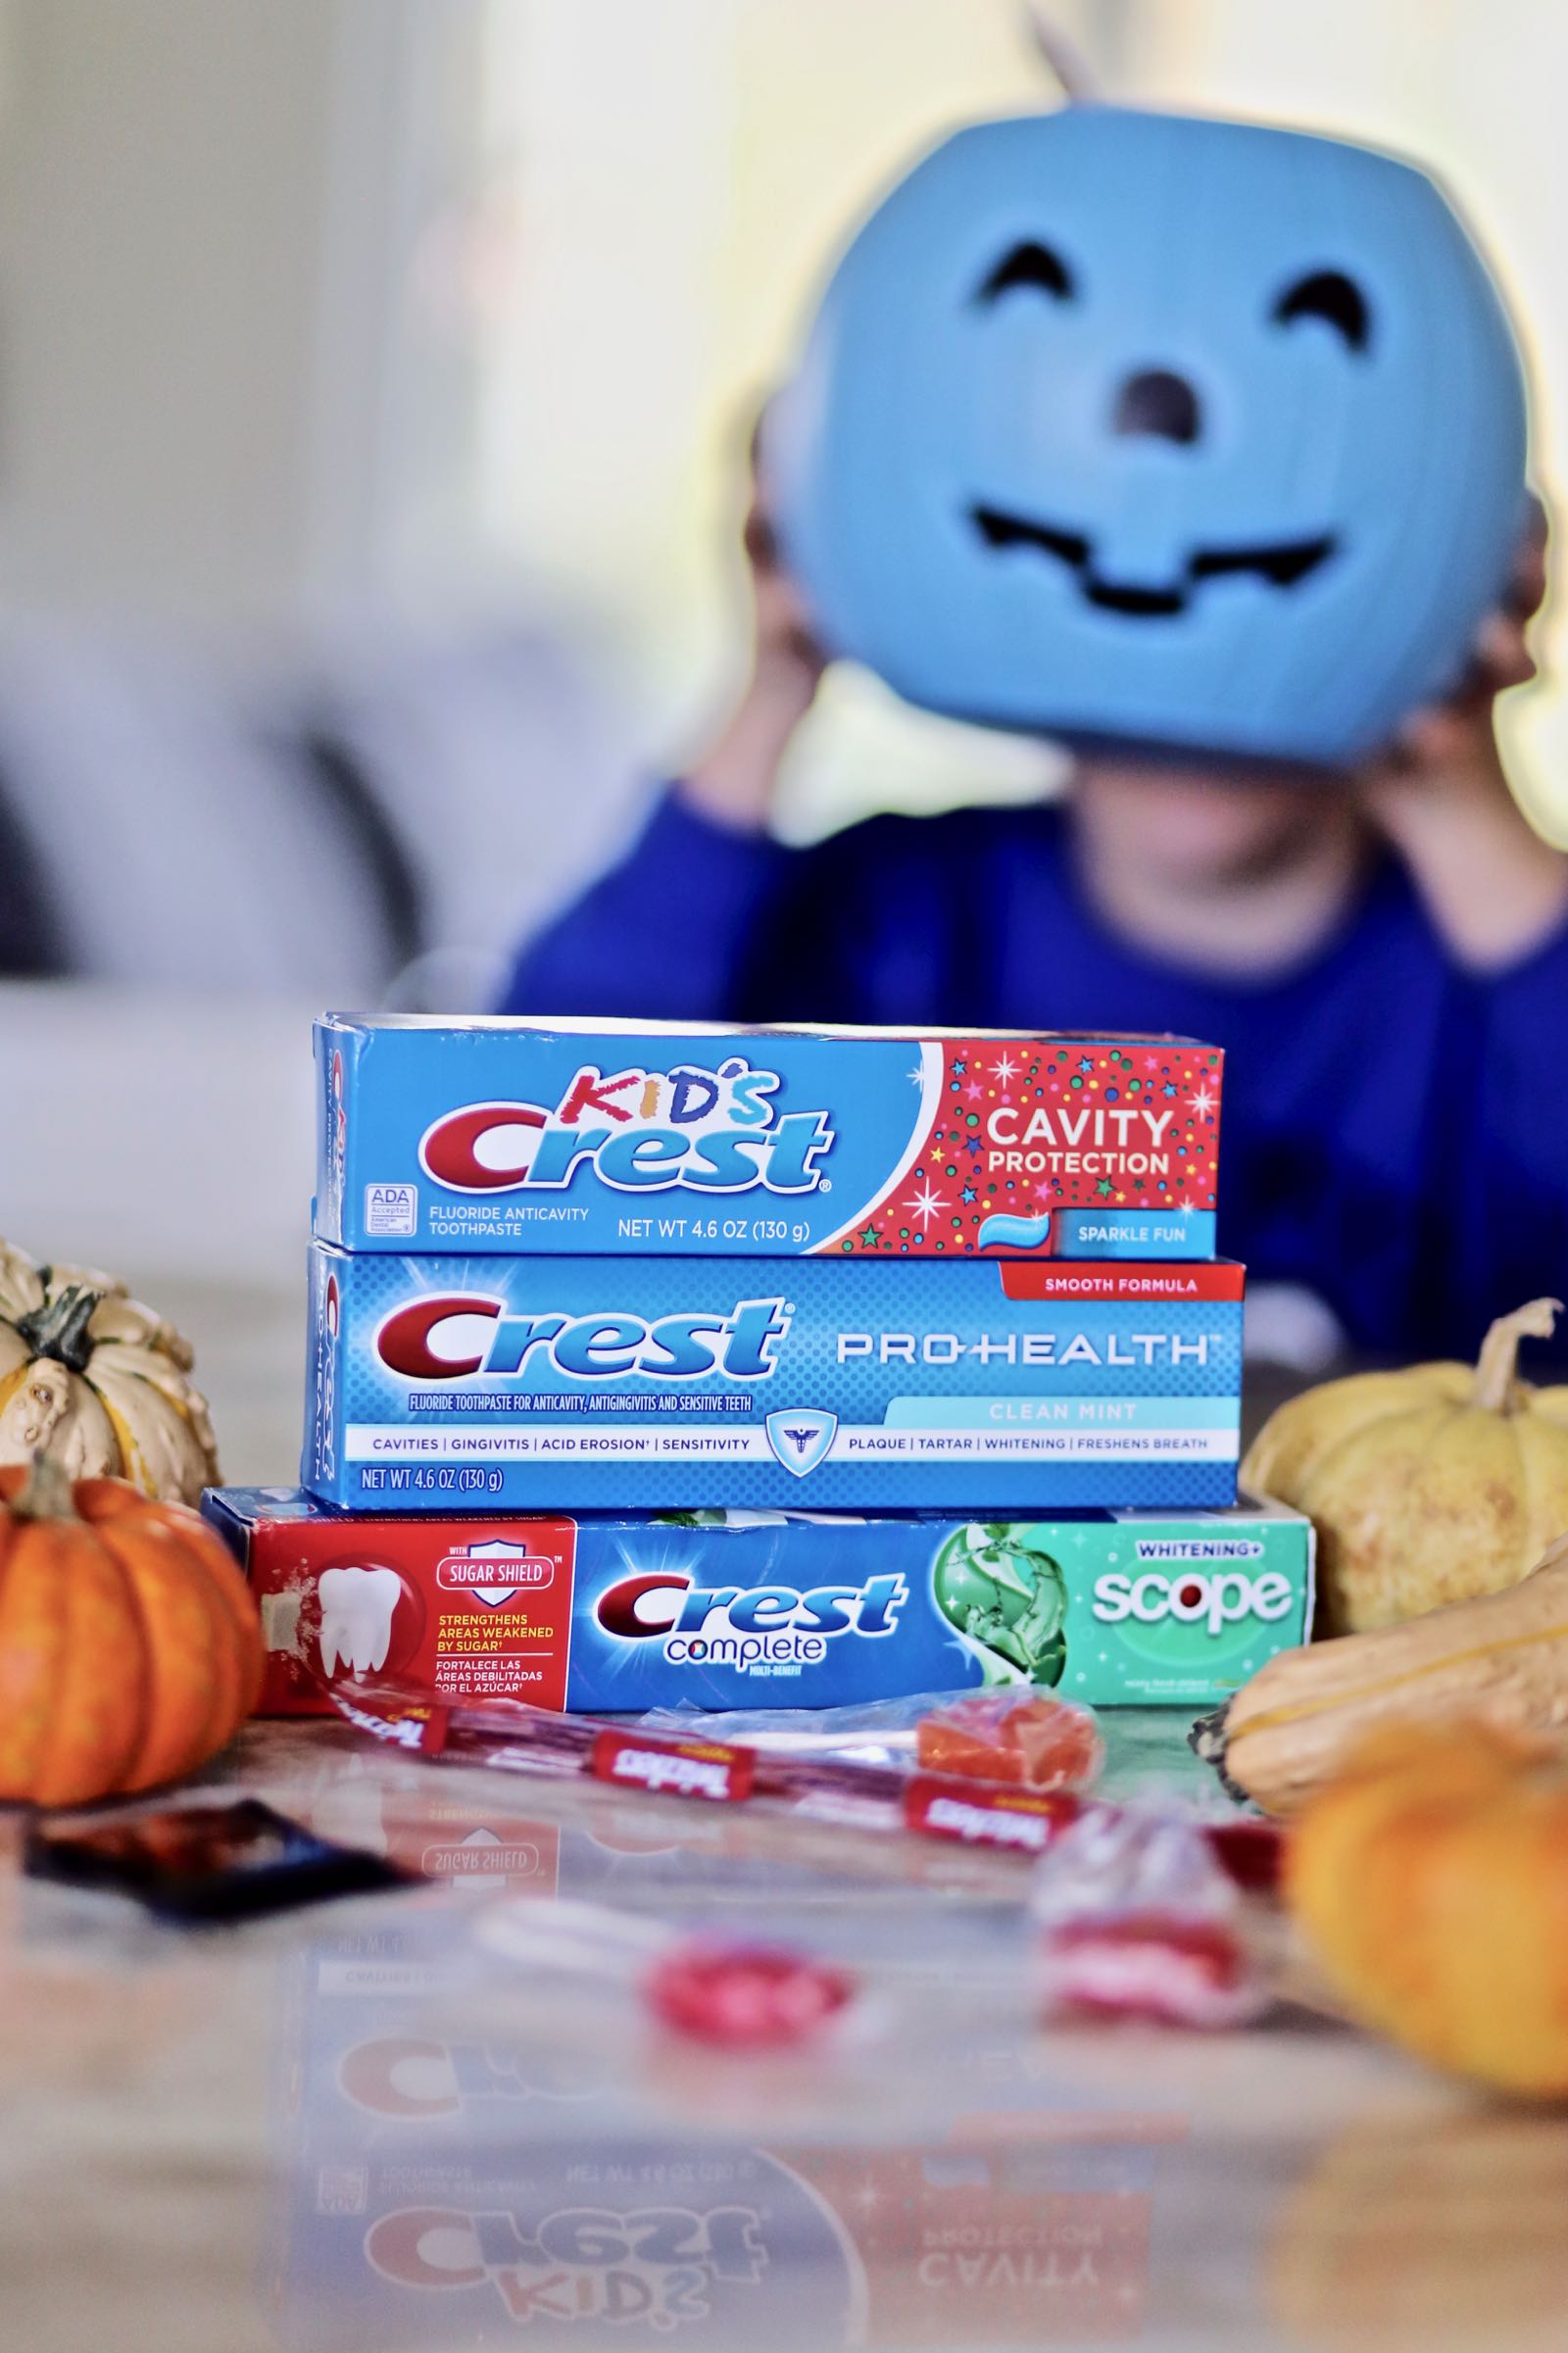 Get your coupon for Crest toothpaste at Target!